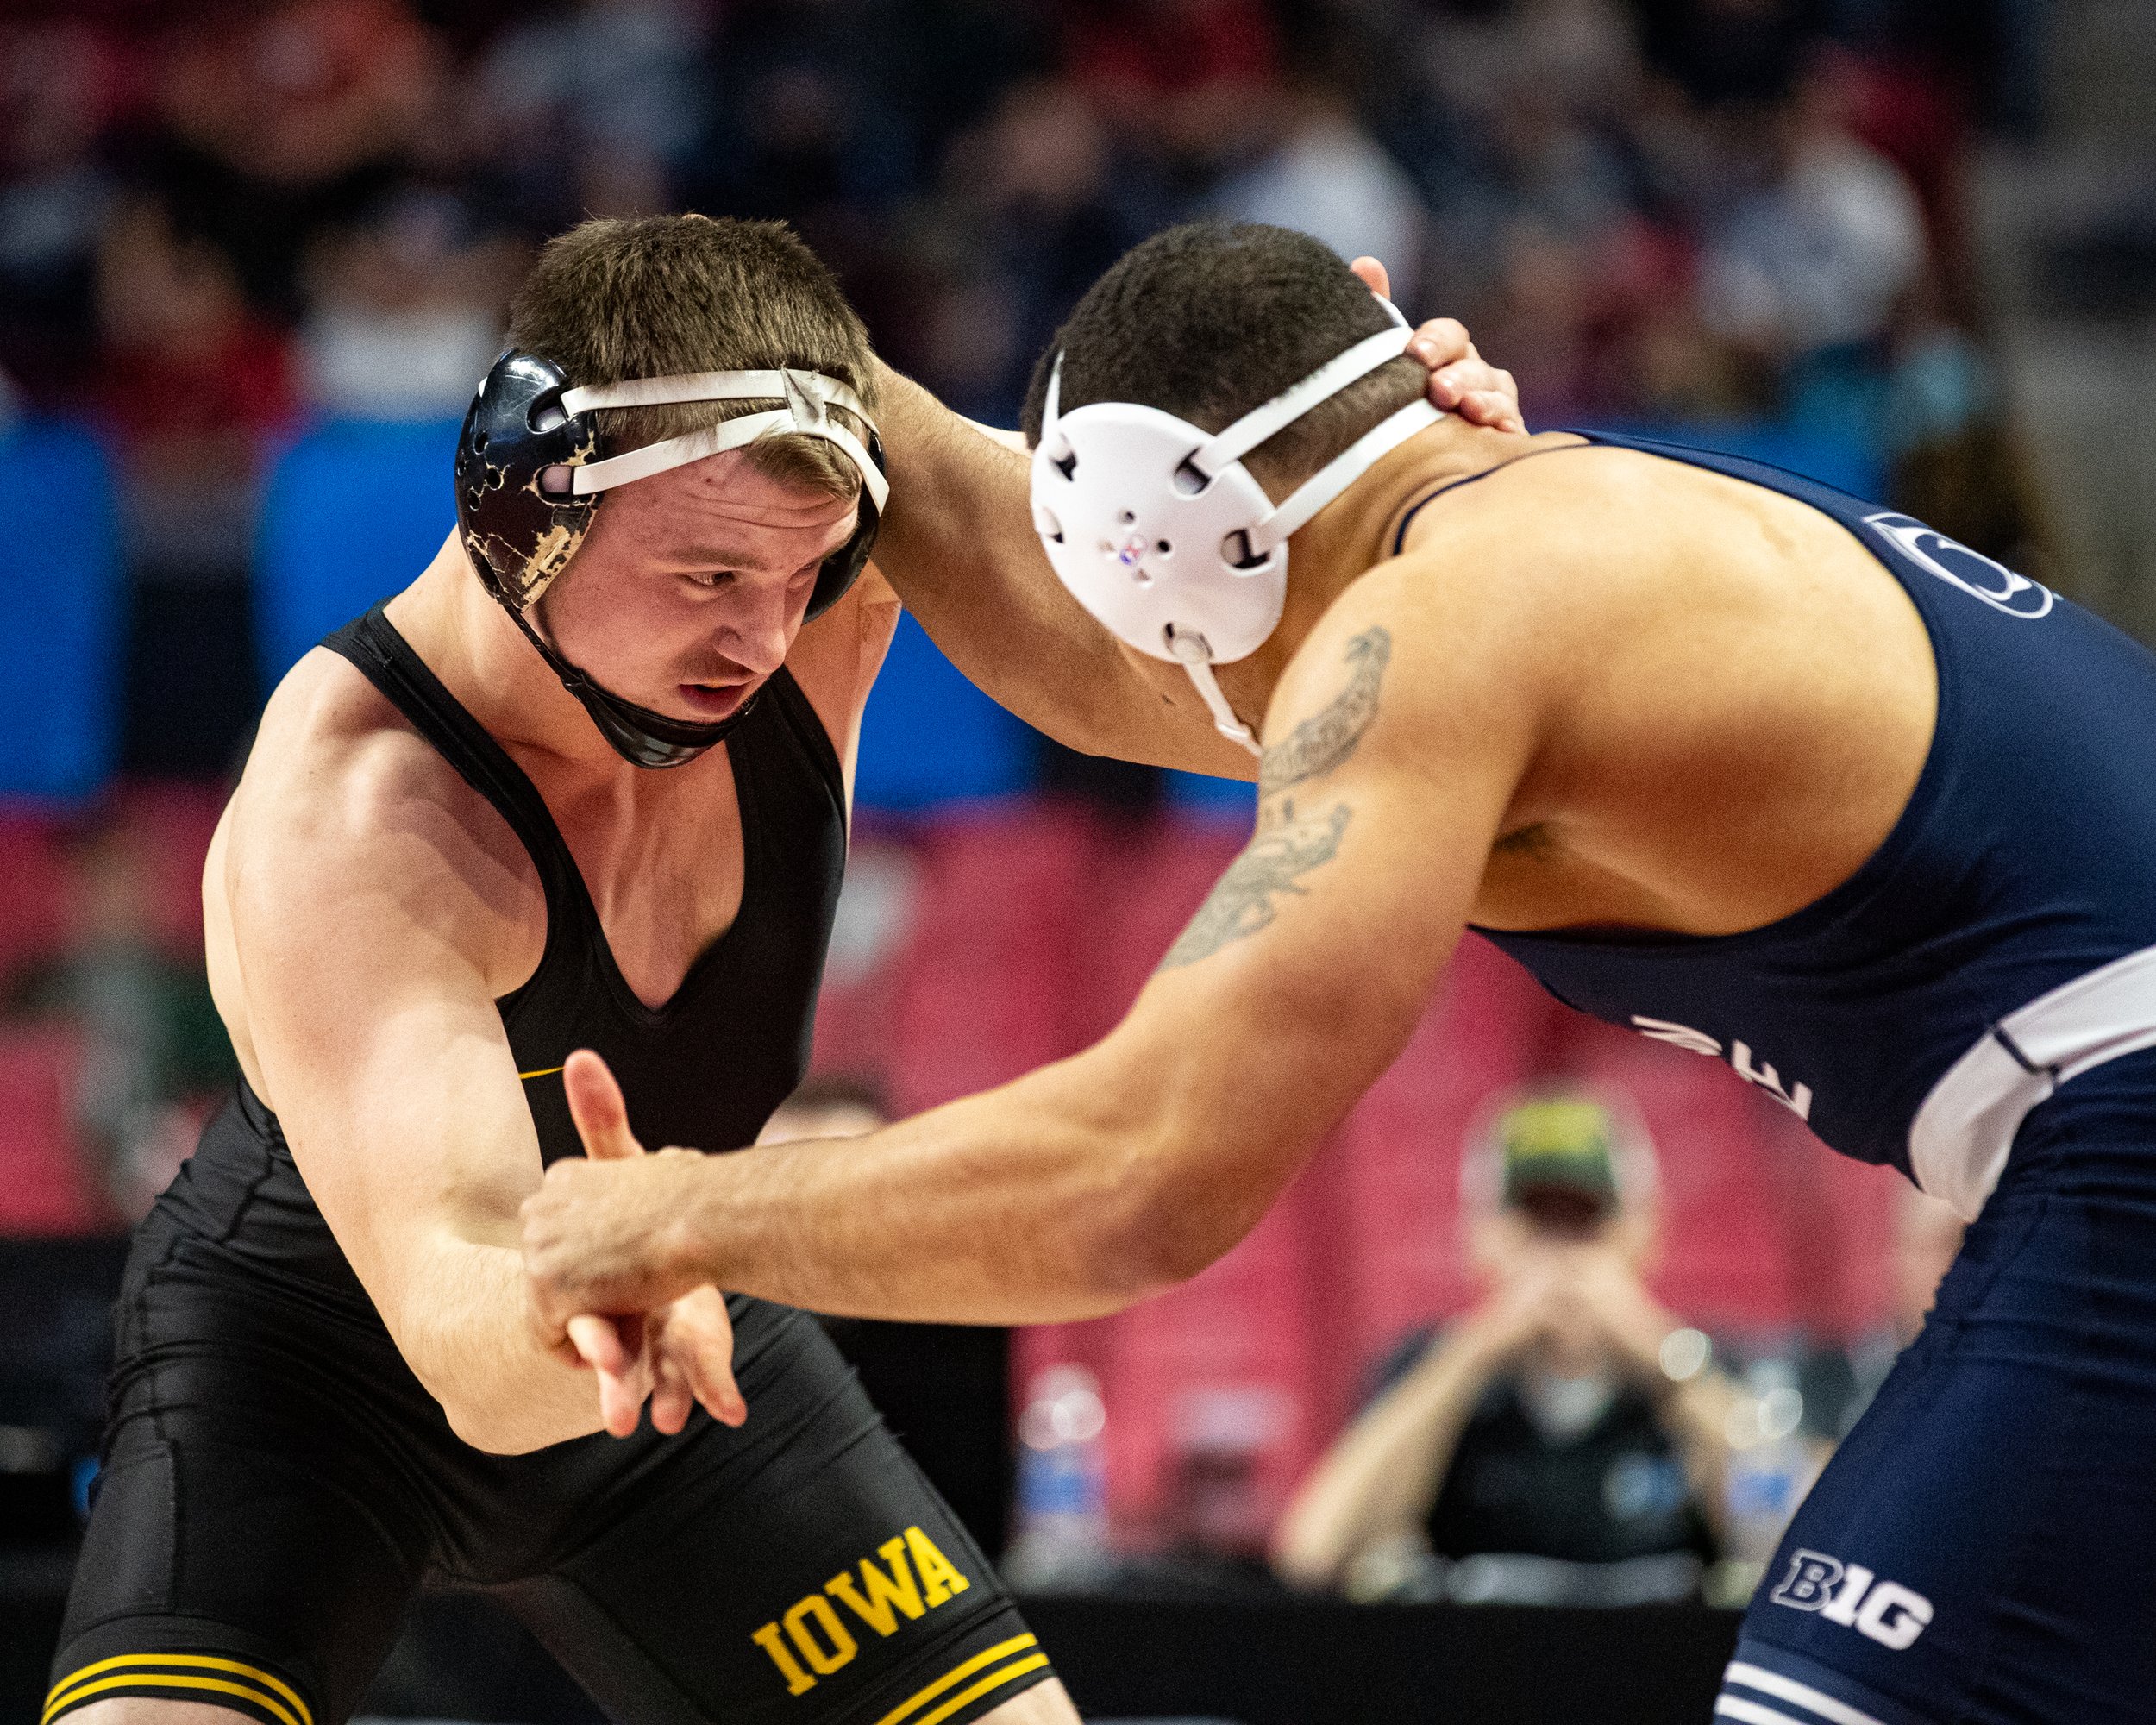  Iowa wrestler Zach Glazier grapples with Penn State’s Aaron Brooks in a 197-lb championship match during the Big Ten Wrestling Championships at the Xfinity Center in College Park, Maryland on Sunday, March 10, 2023. Glazier lost via Technical Fall a